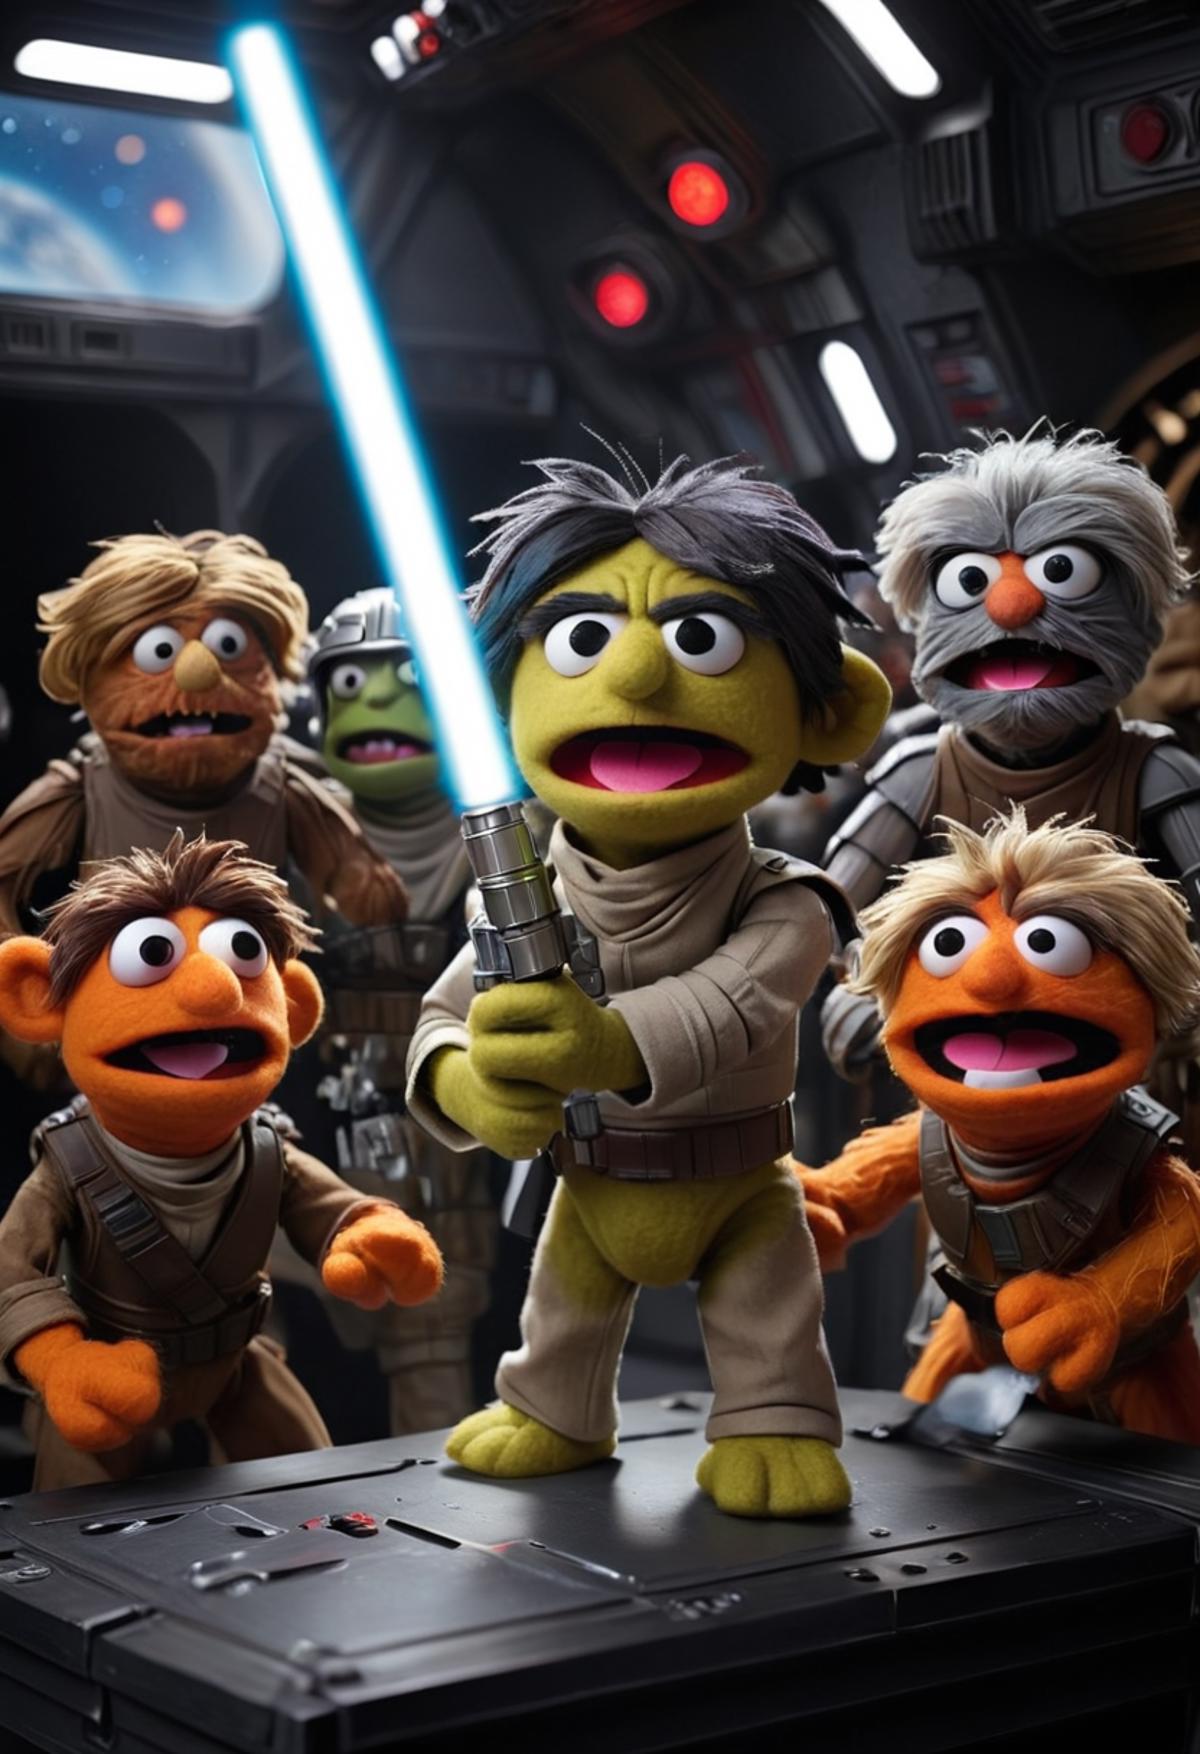 A group of Muppets posing for a photo with a Star Wars lightsaber.